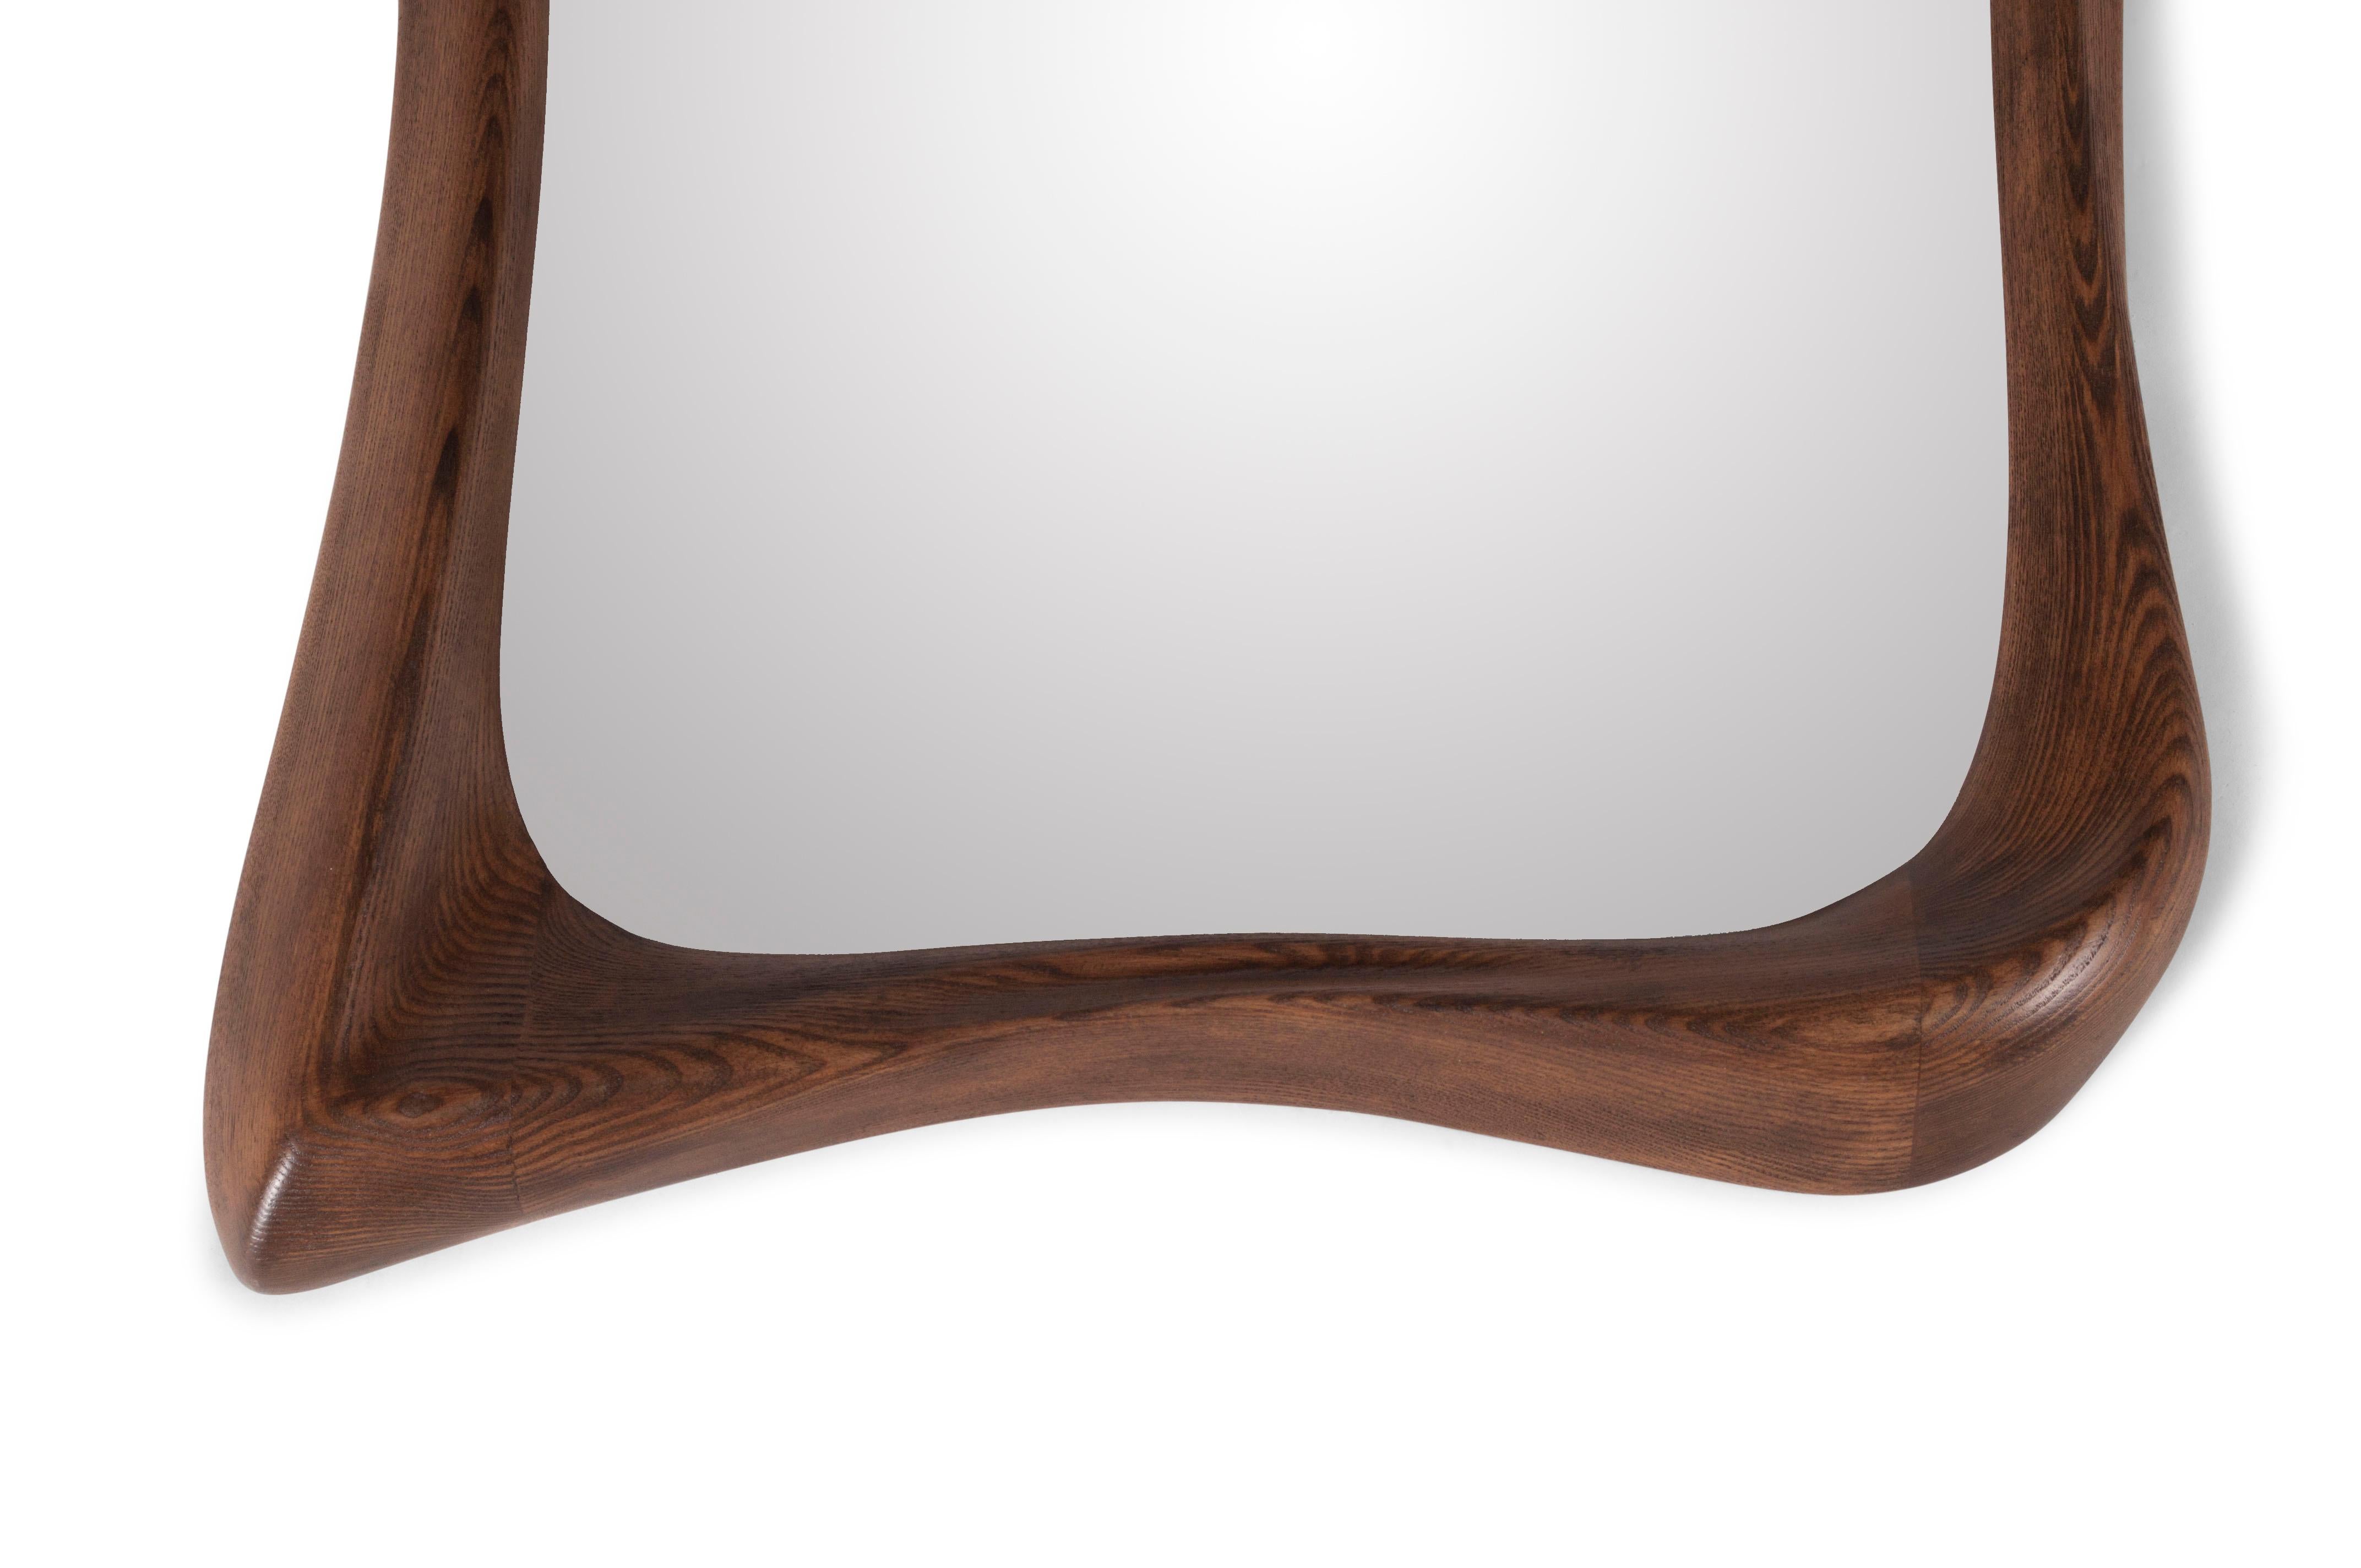 Carved Amorph Narcissus Mirror in Graphite Walnut stain on Ash wood For Sale